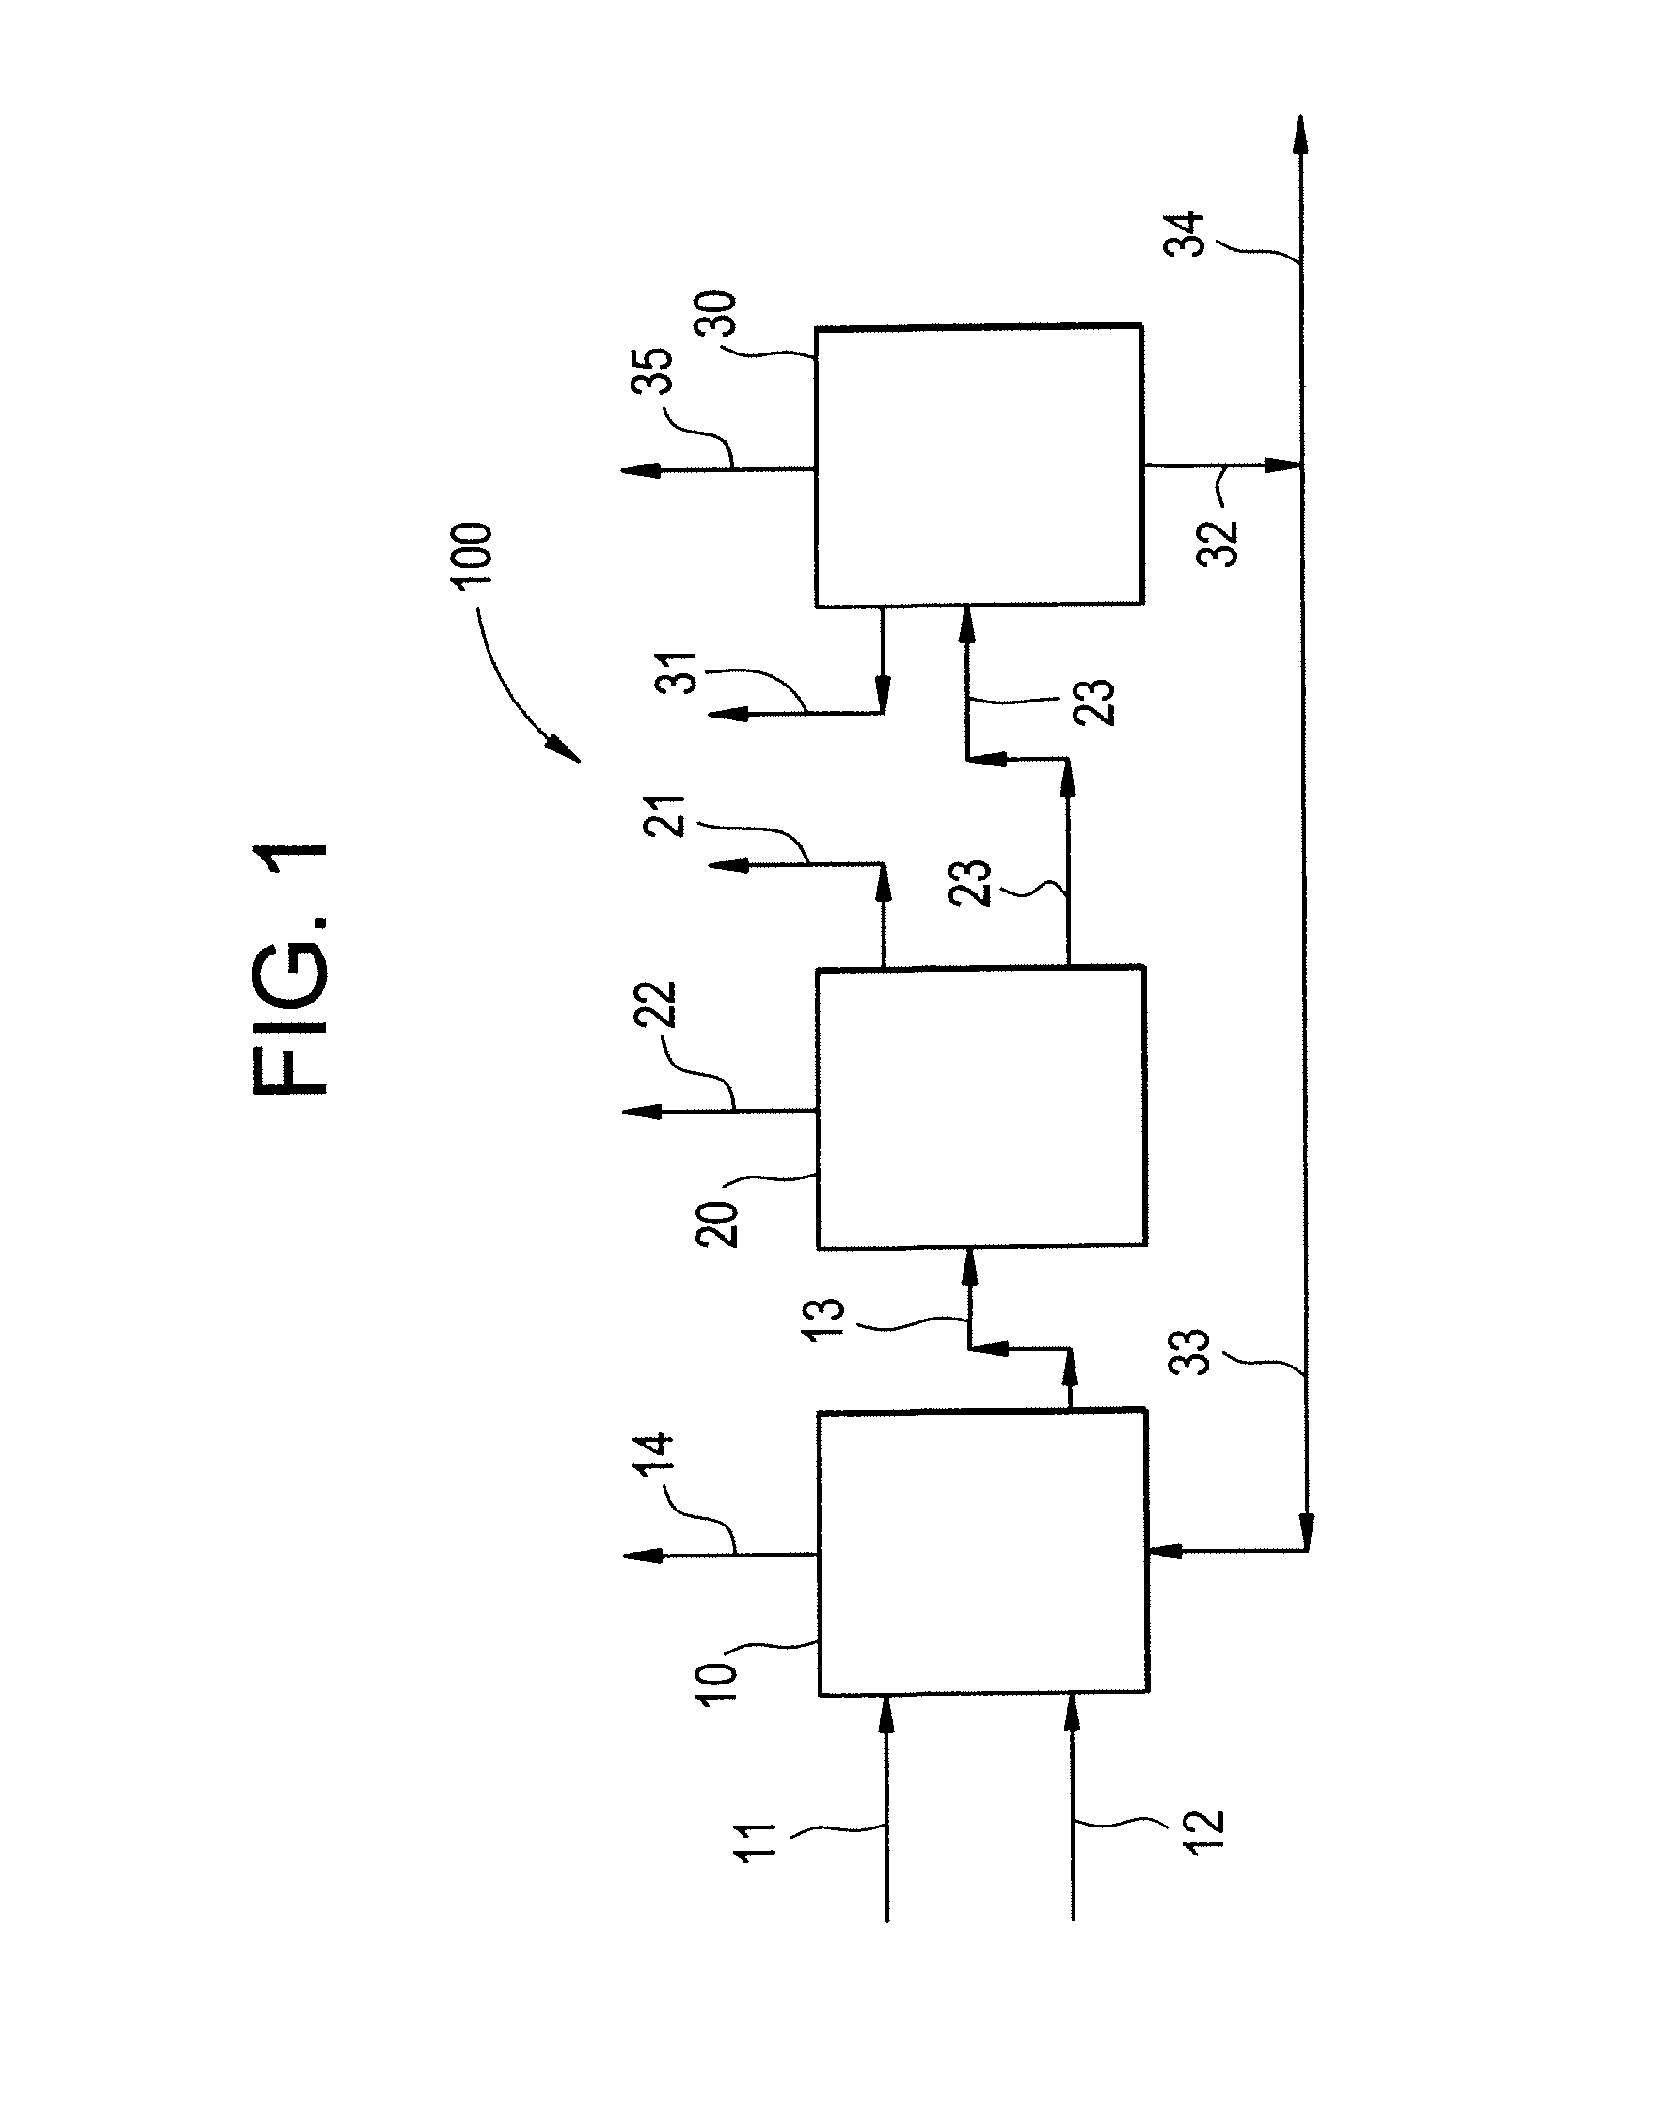 Multi-stage process and apparatus for recovering dichlorohydrins